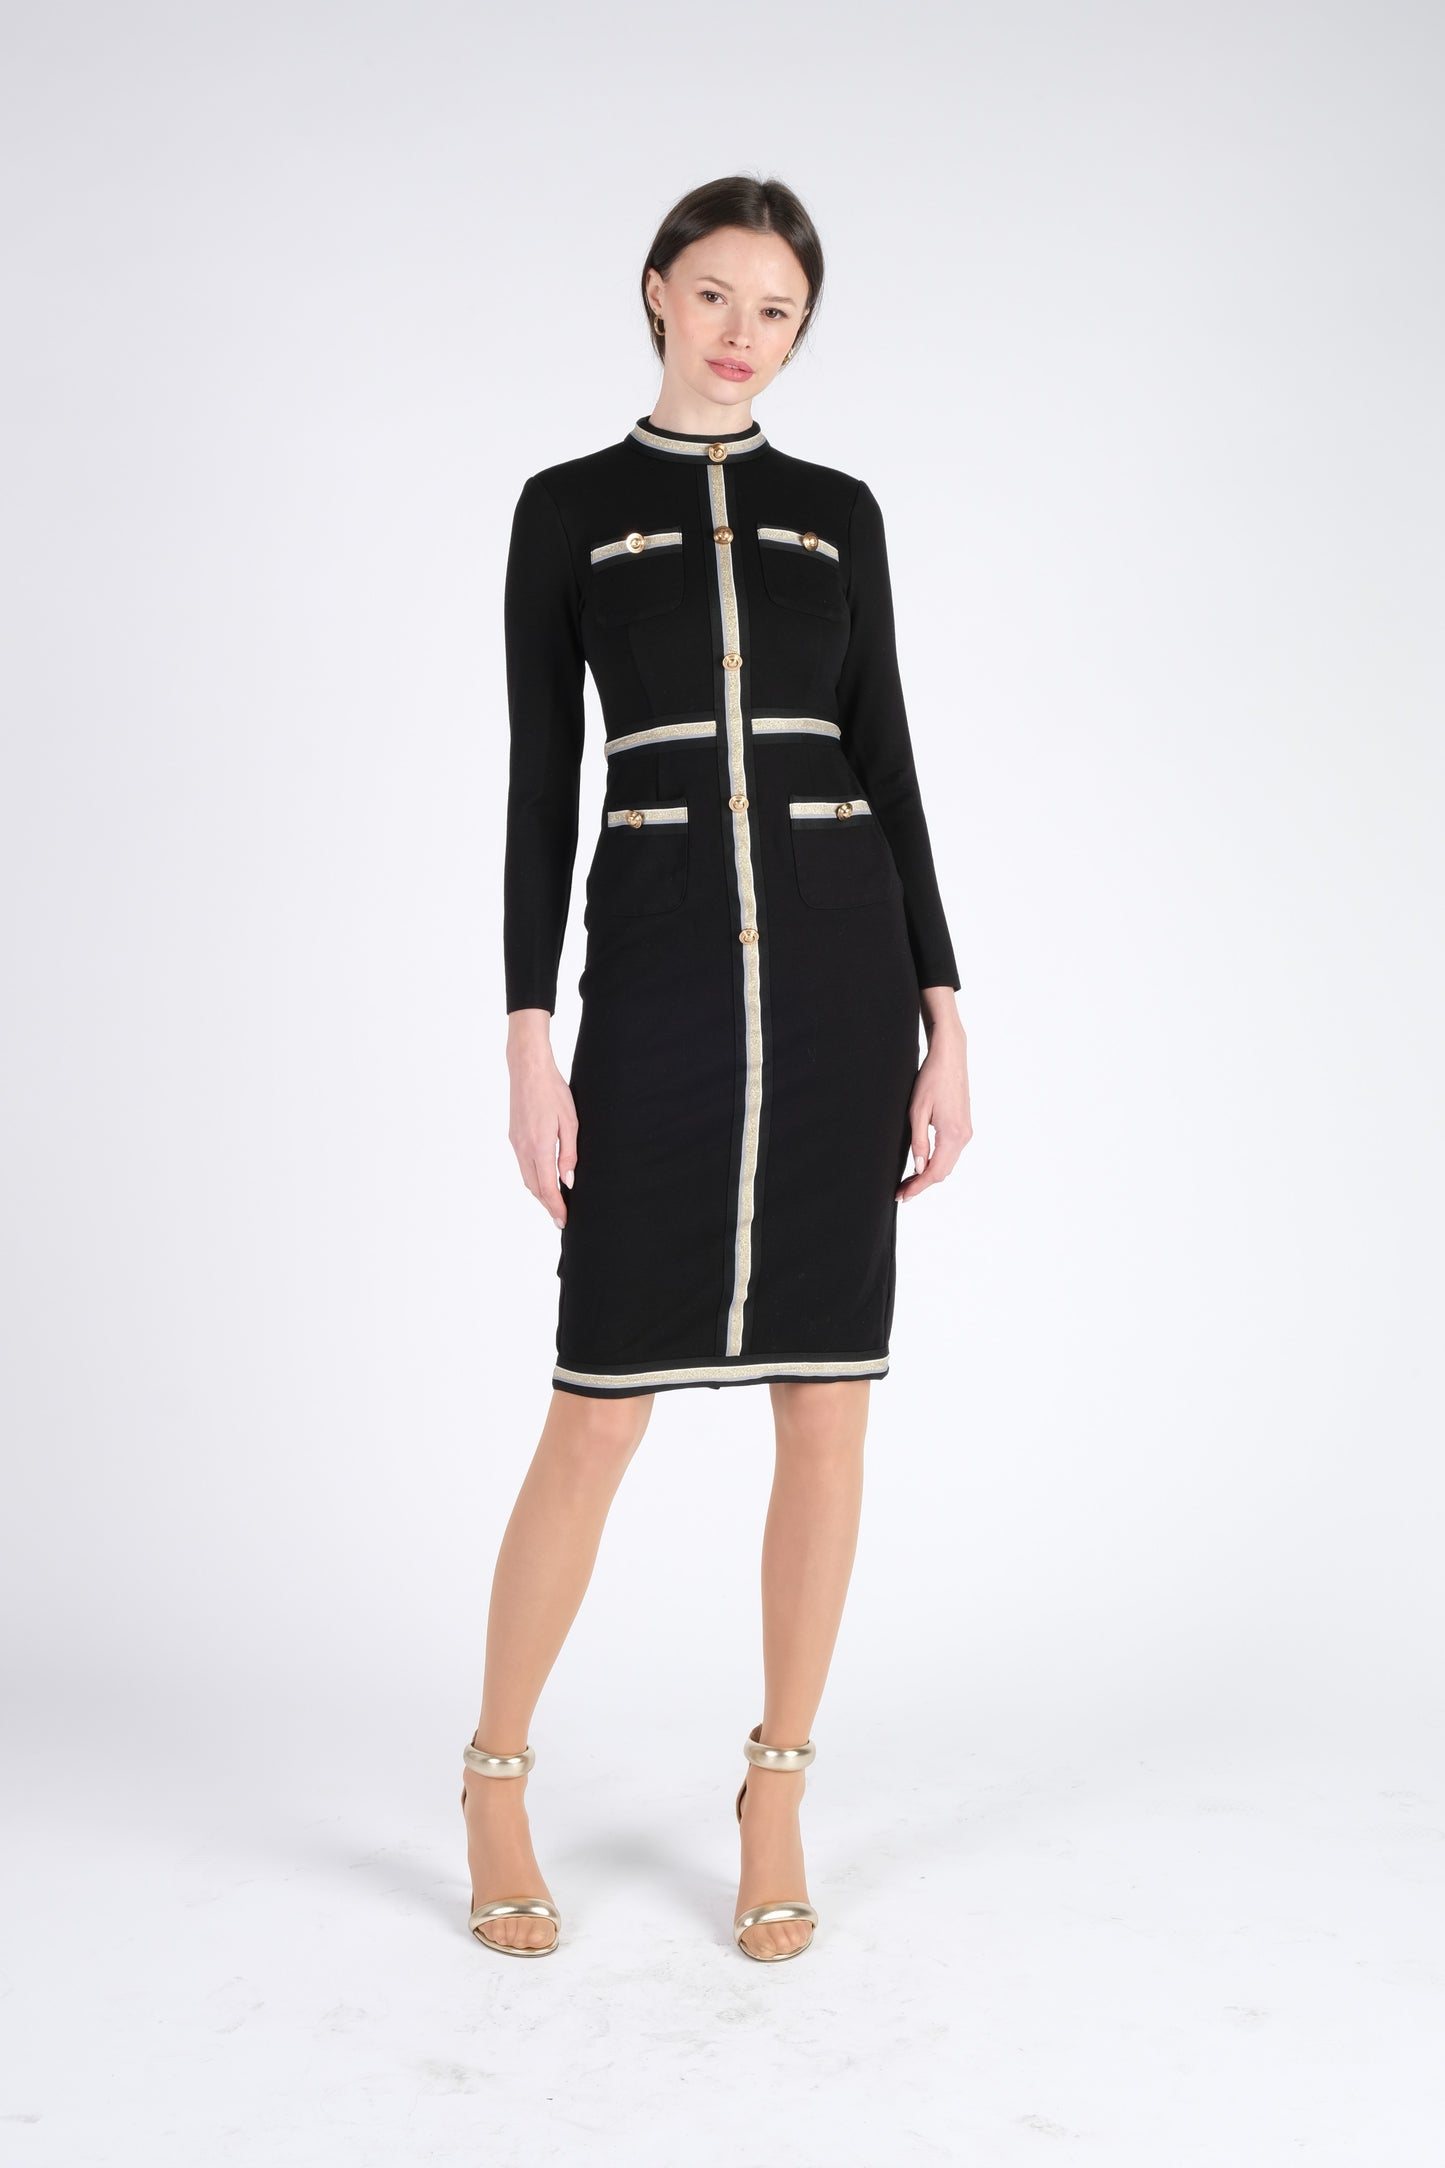 Black Midi Dress with Buttons